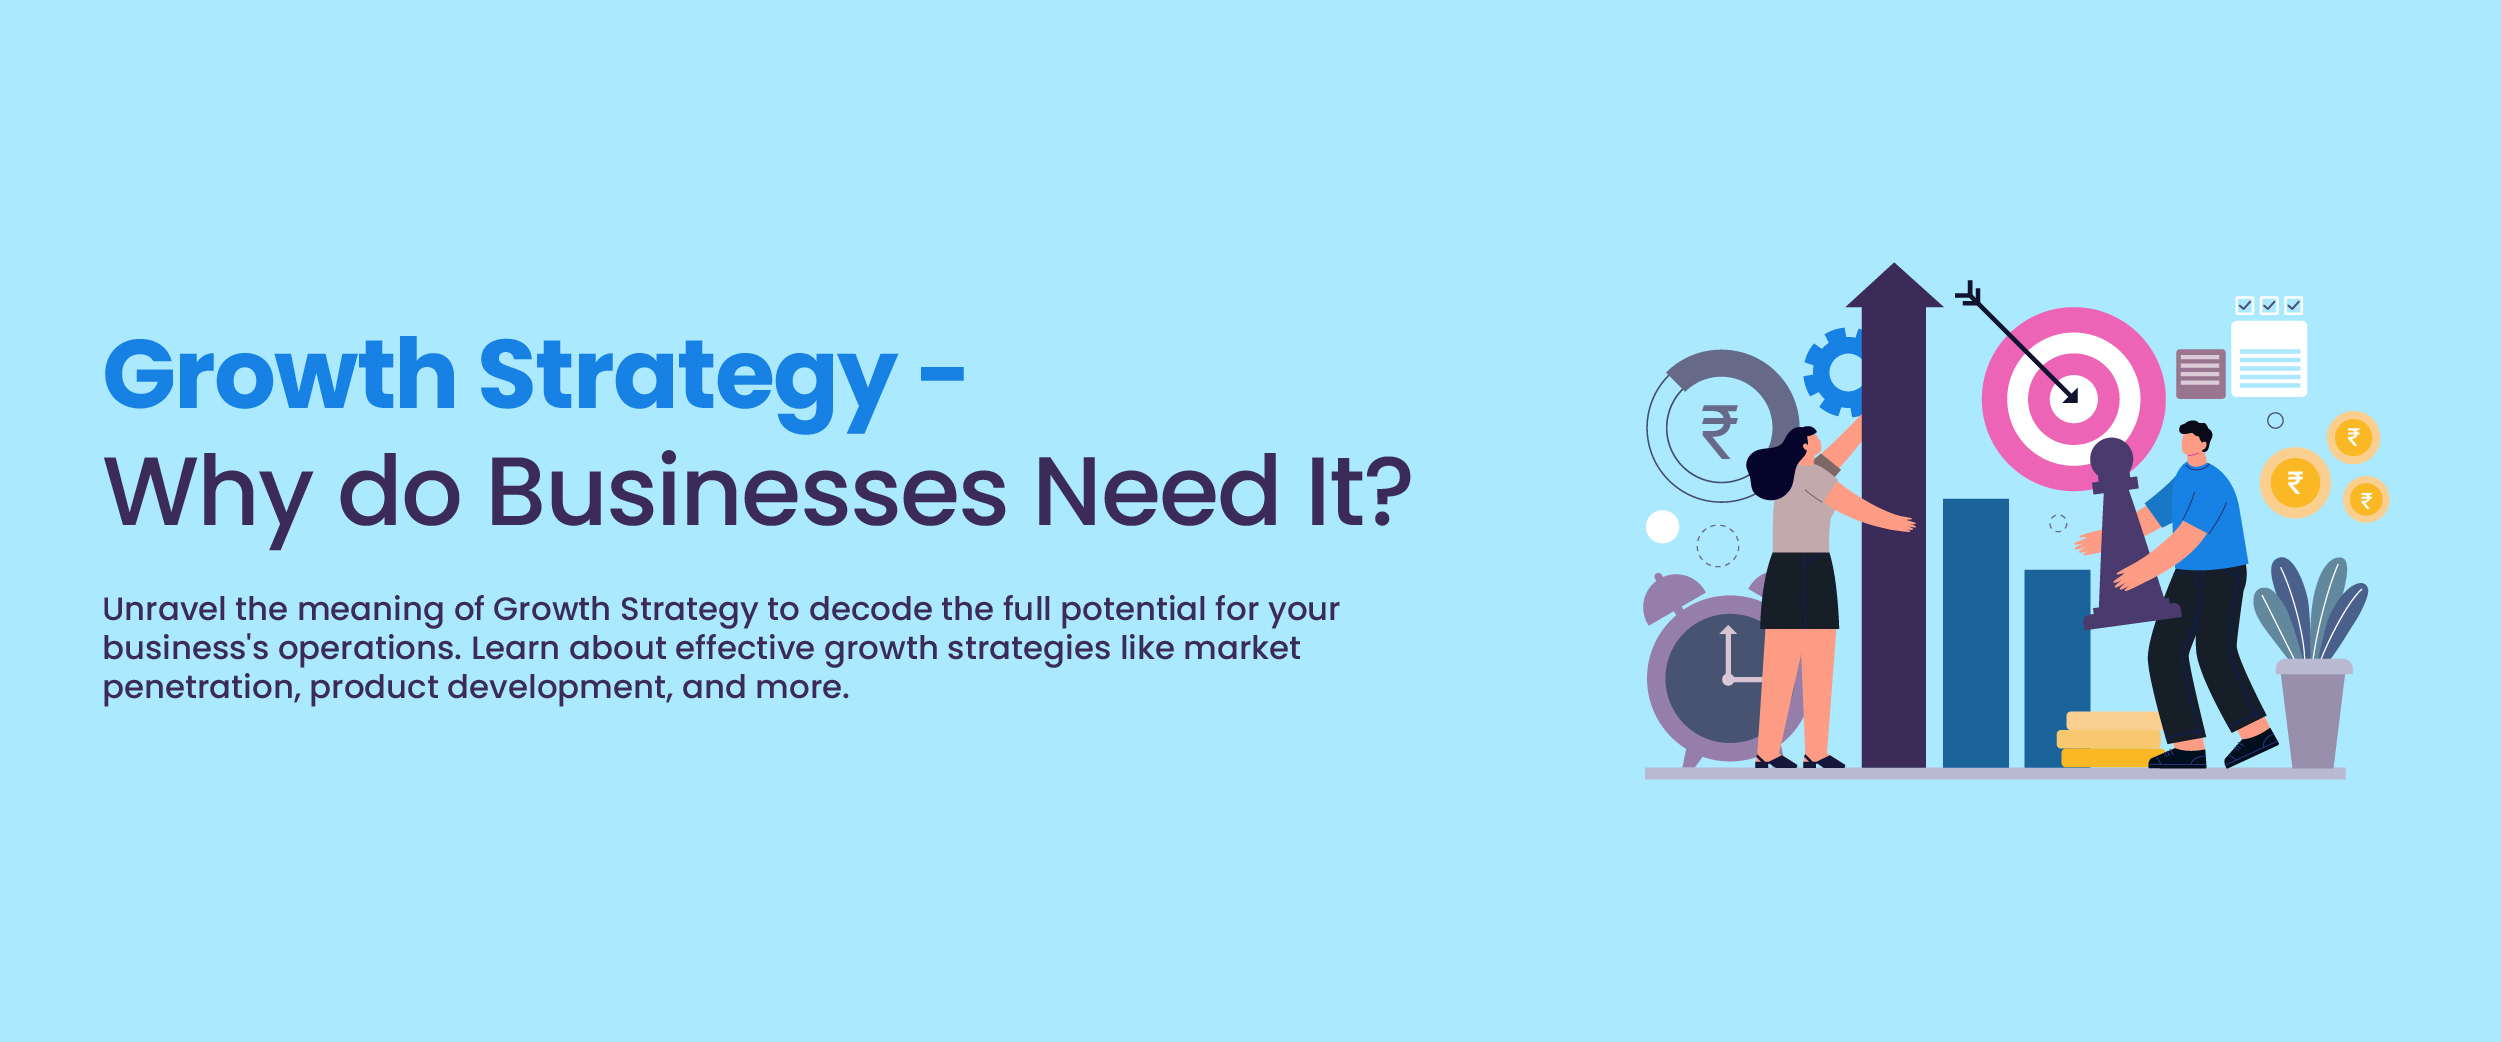 Growth Strategy - Why do Businesses Need It